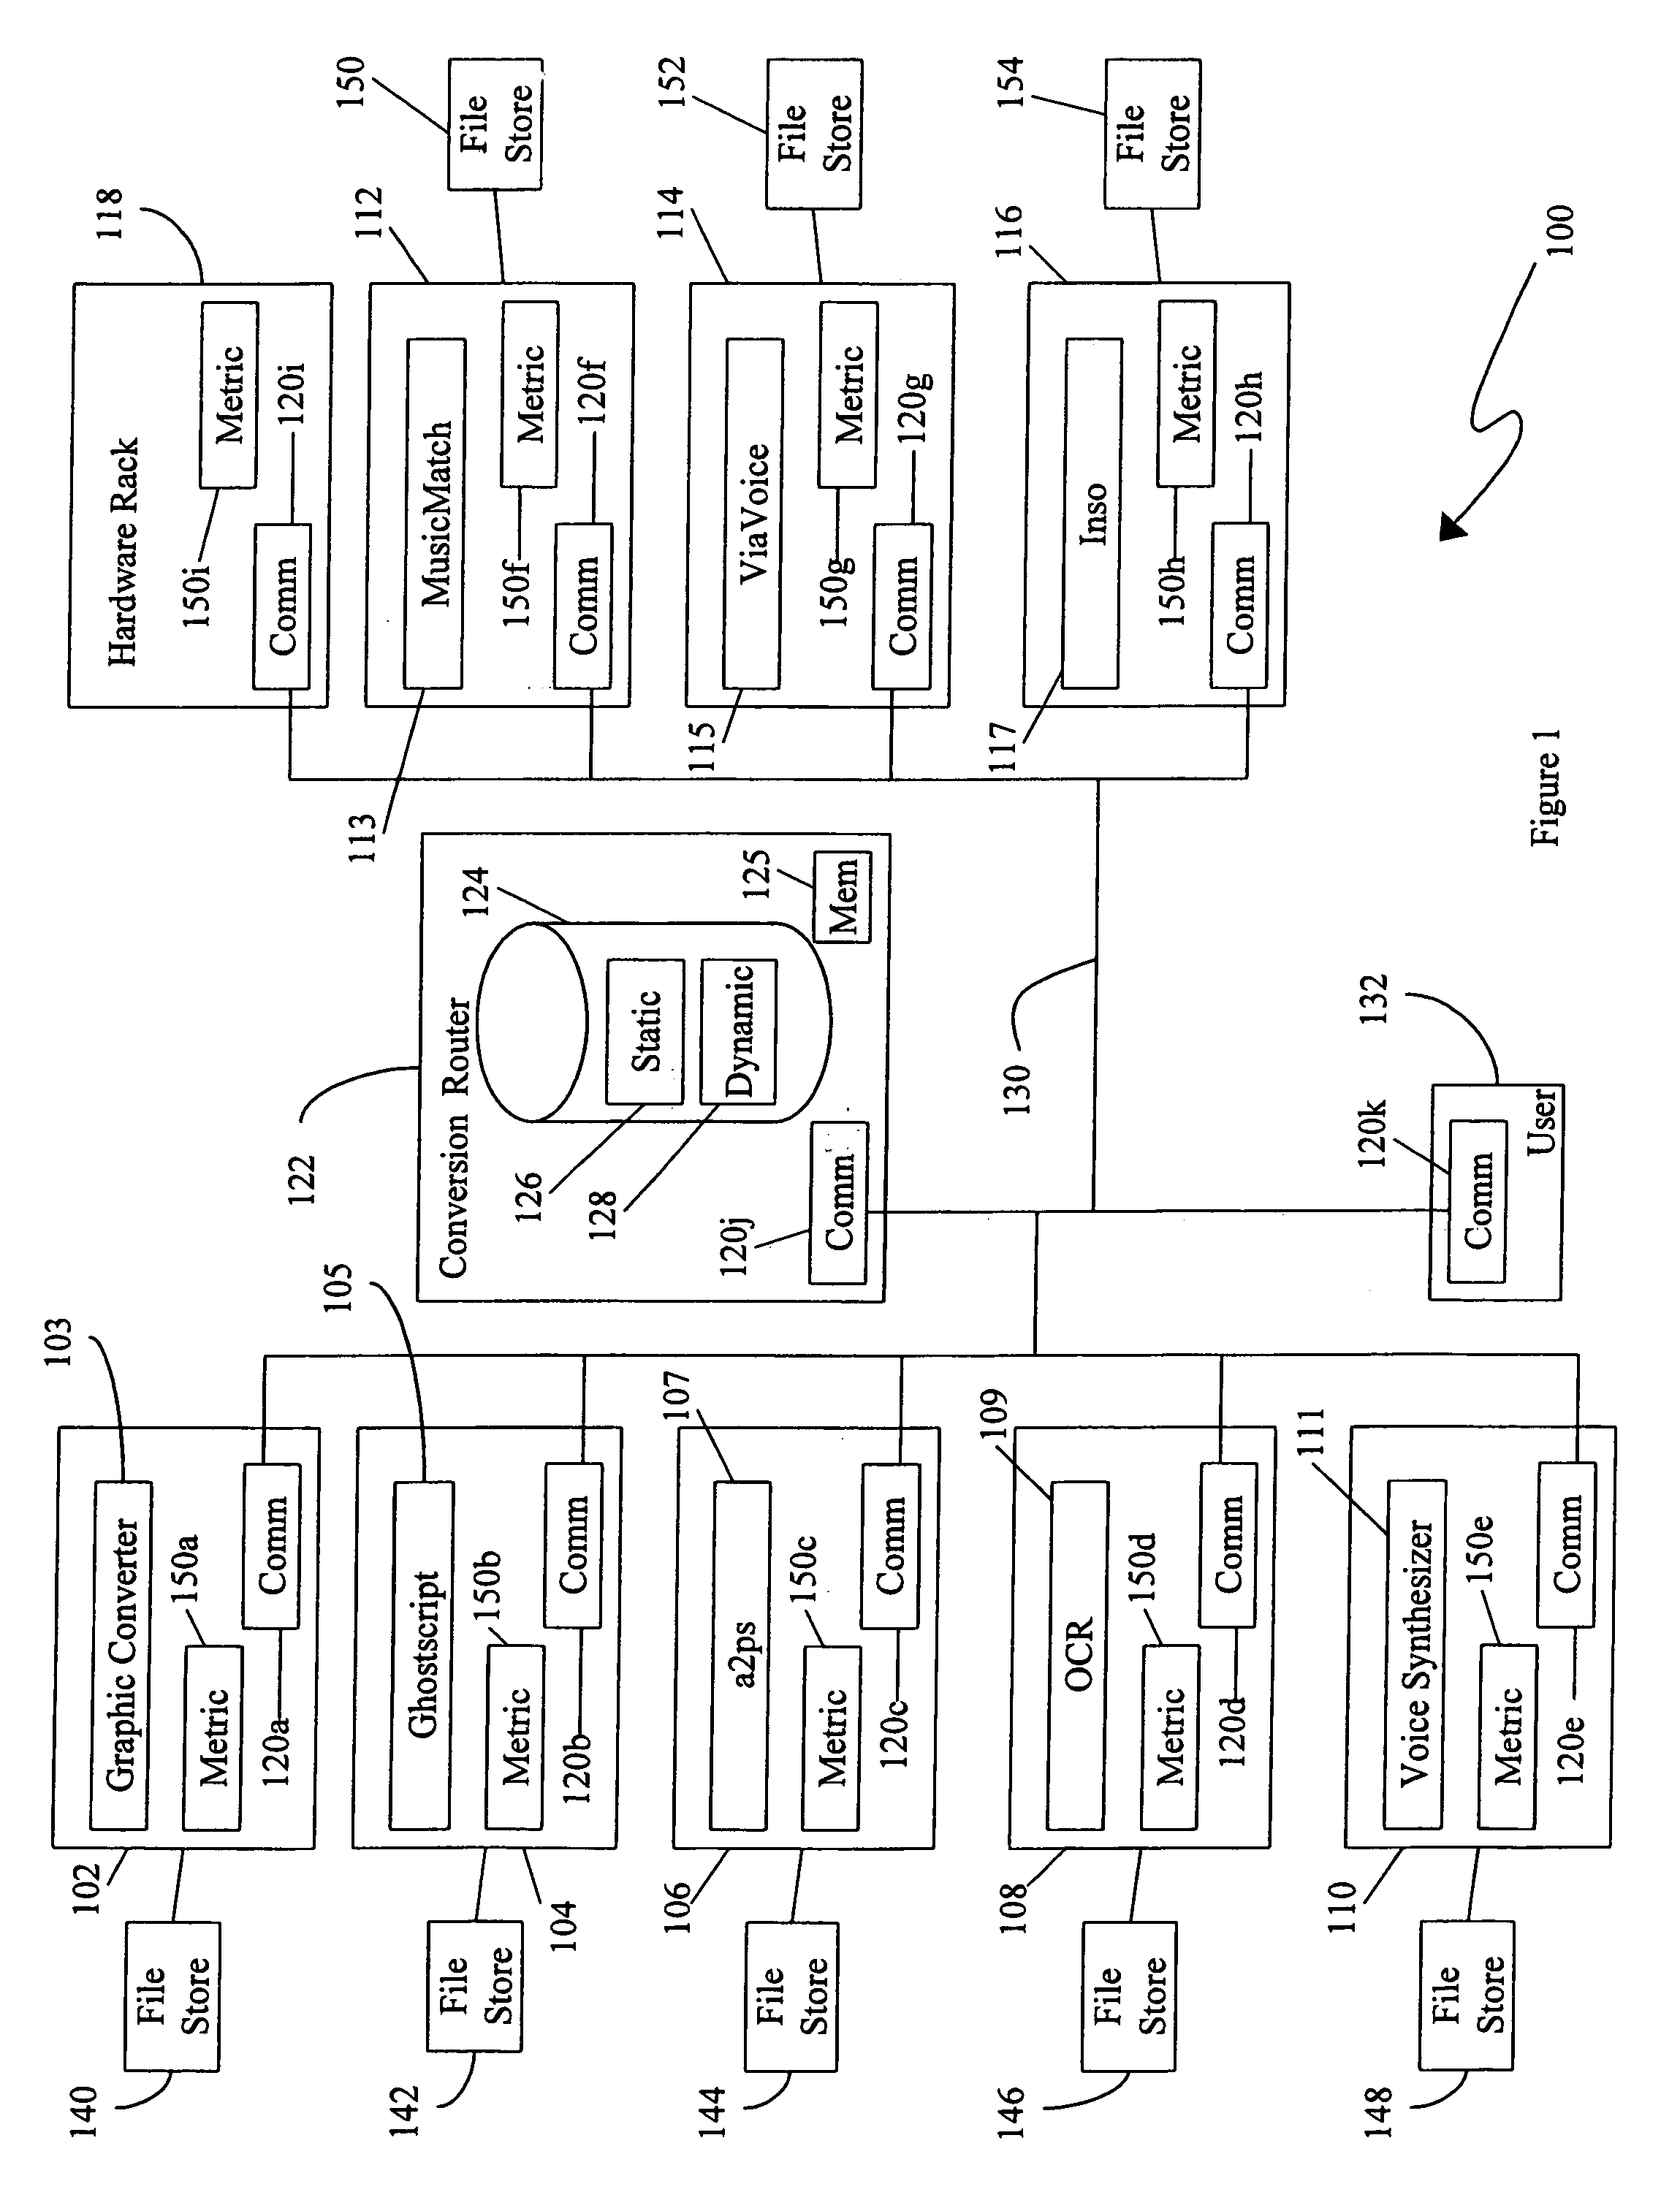 Flexible scalable file conversion system and method